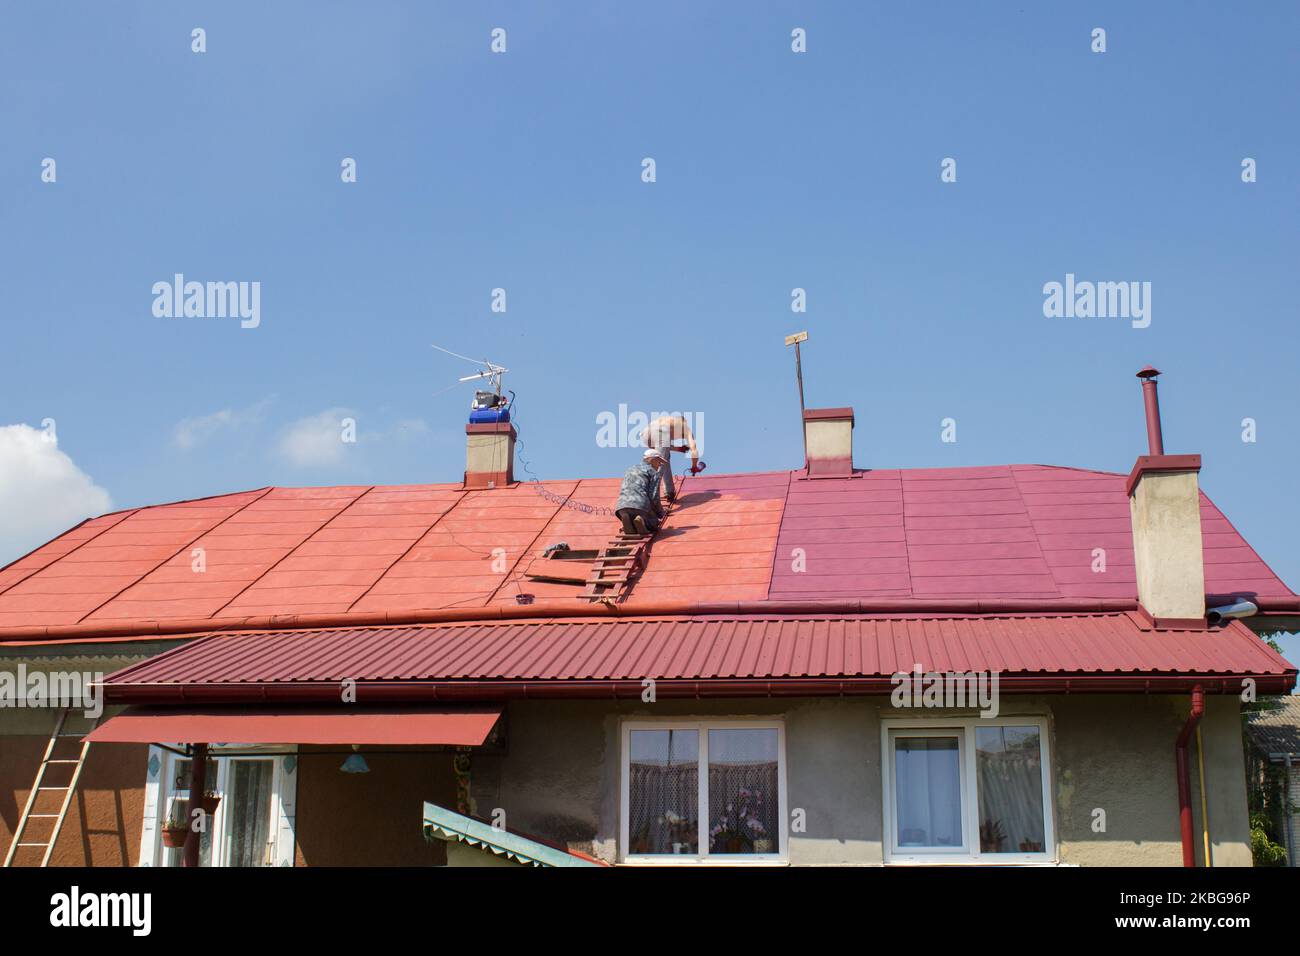 summer, two men painted red roof compressor Stock Photo